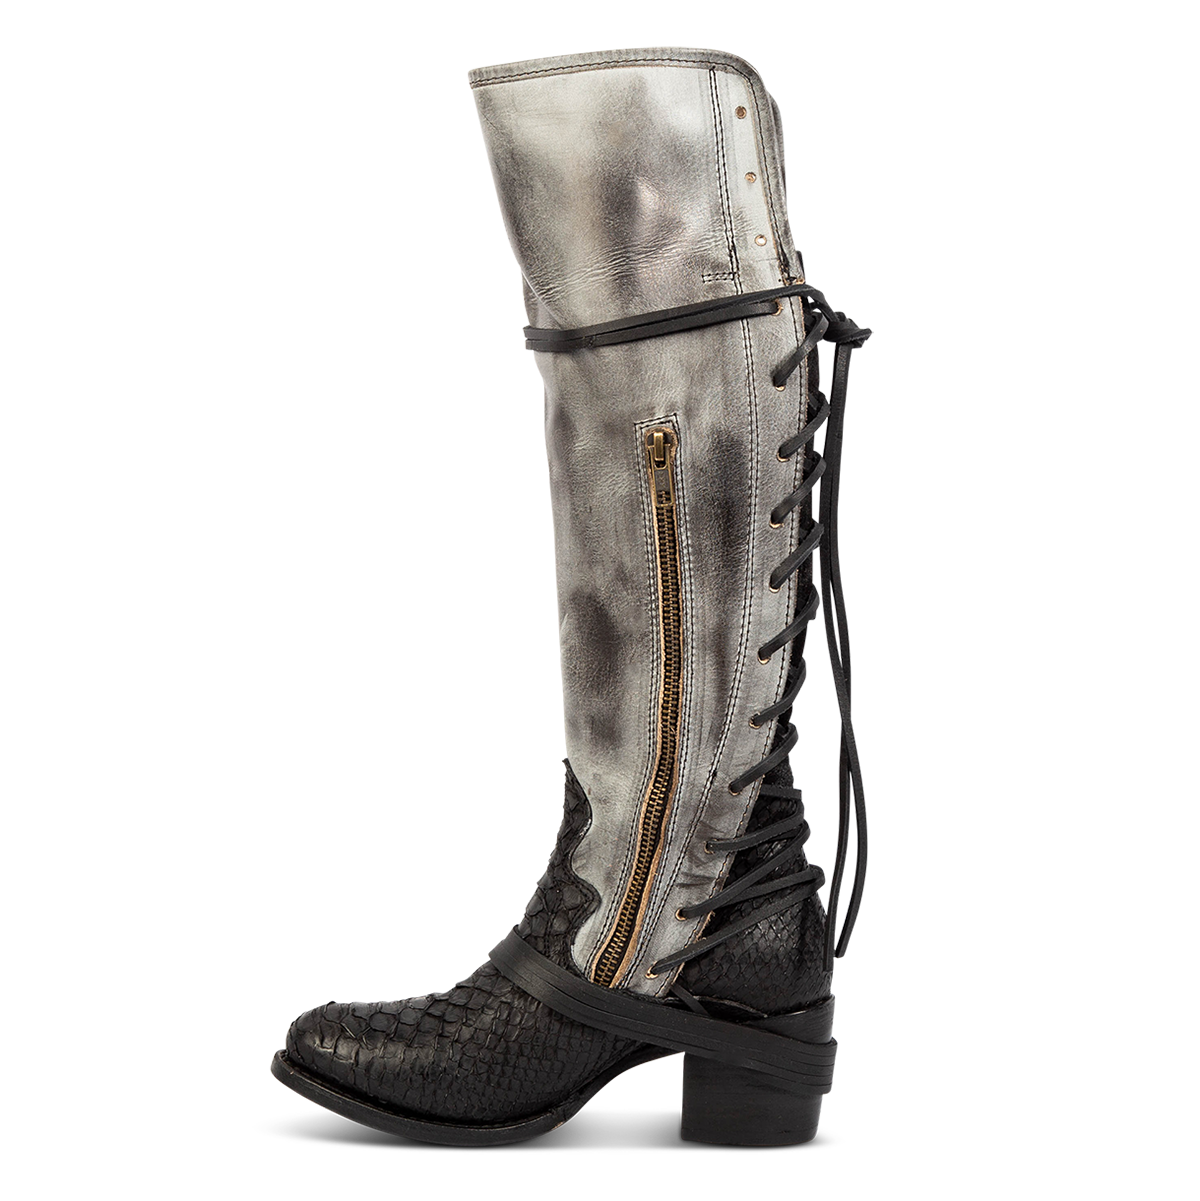 Inside view showing working brass zip closure and adjustable wrap around laces on FREEBIRD women's Coal black python leather tall boot